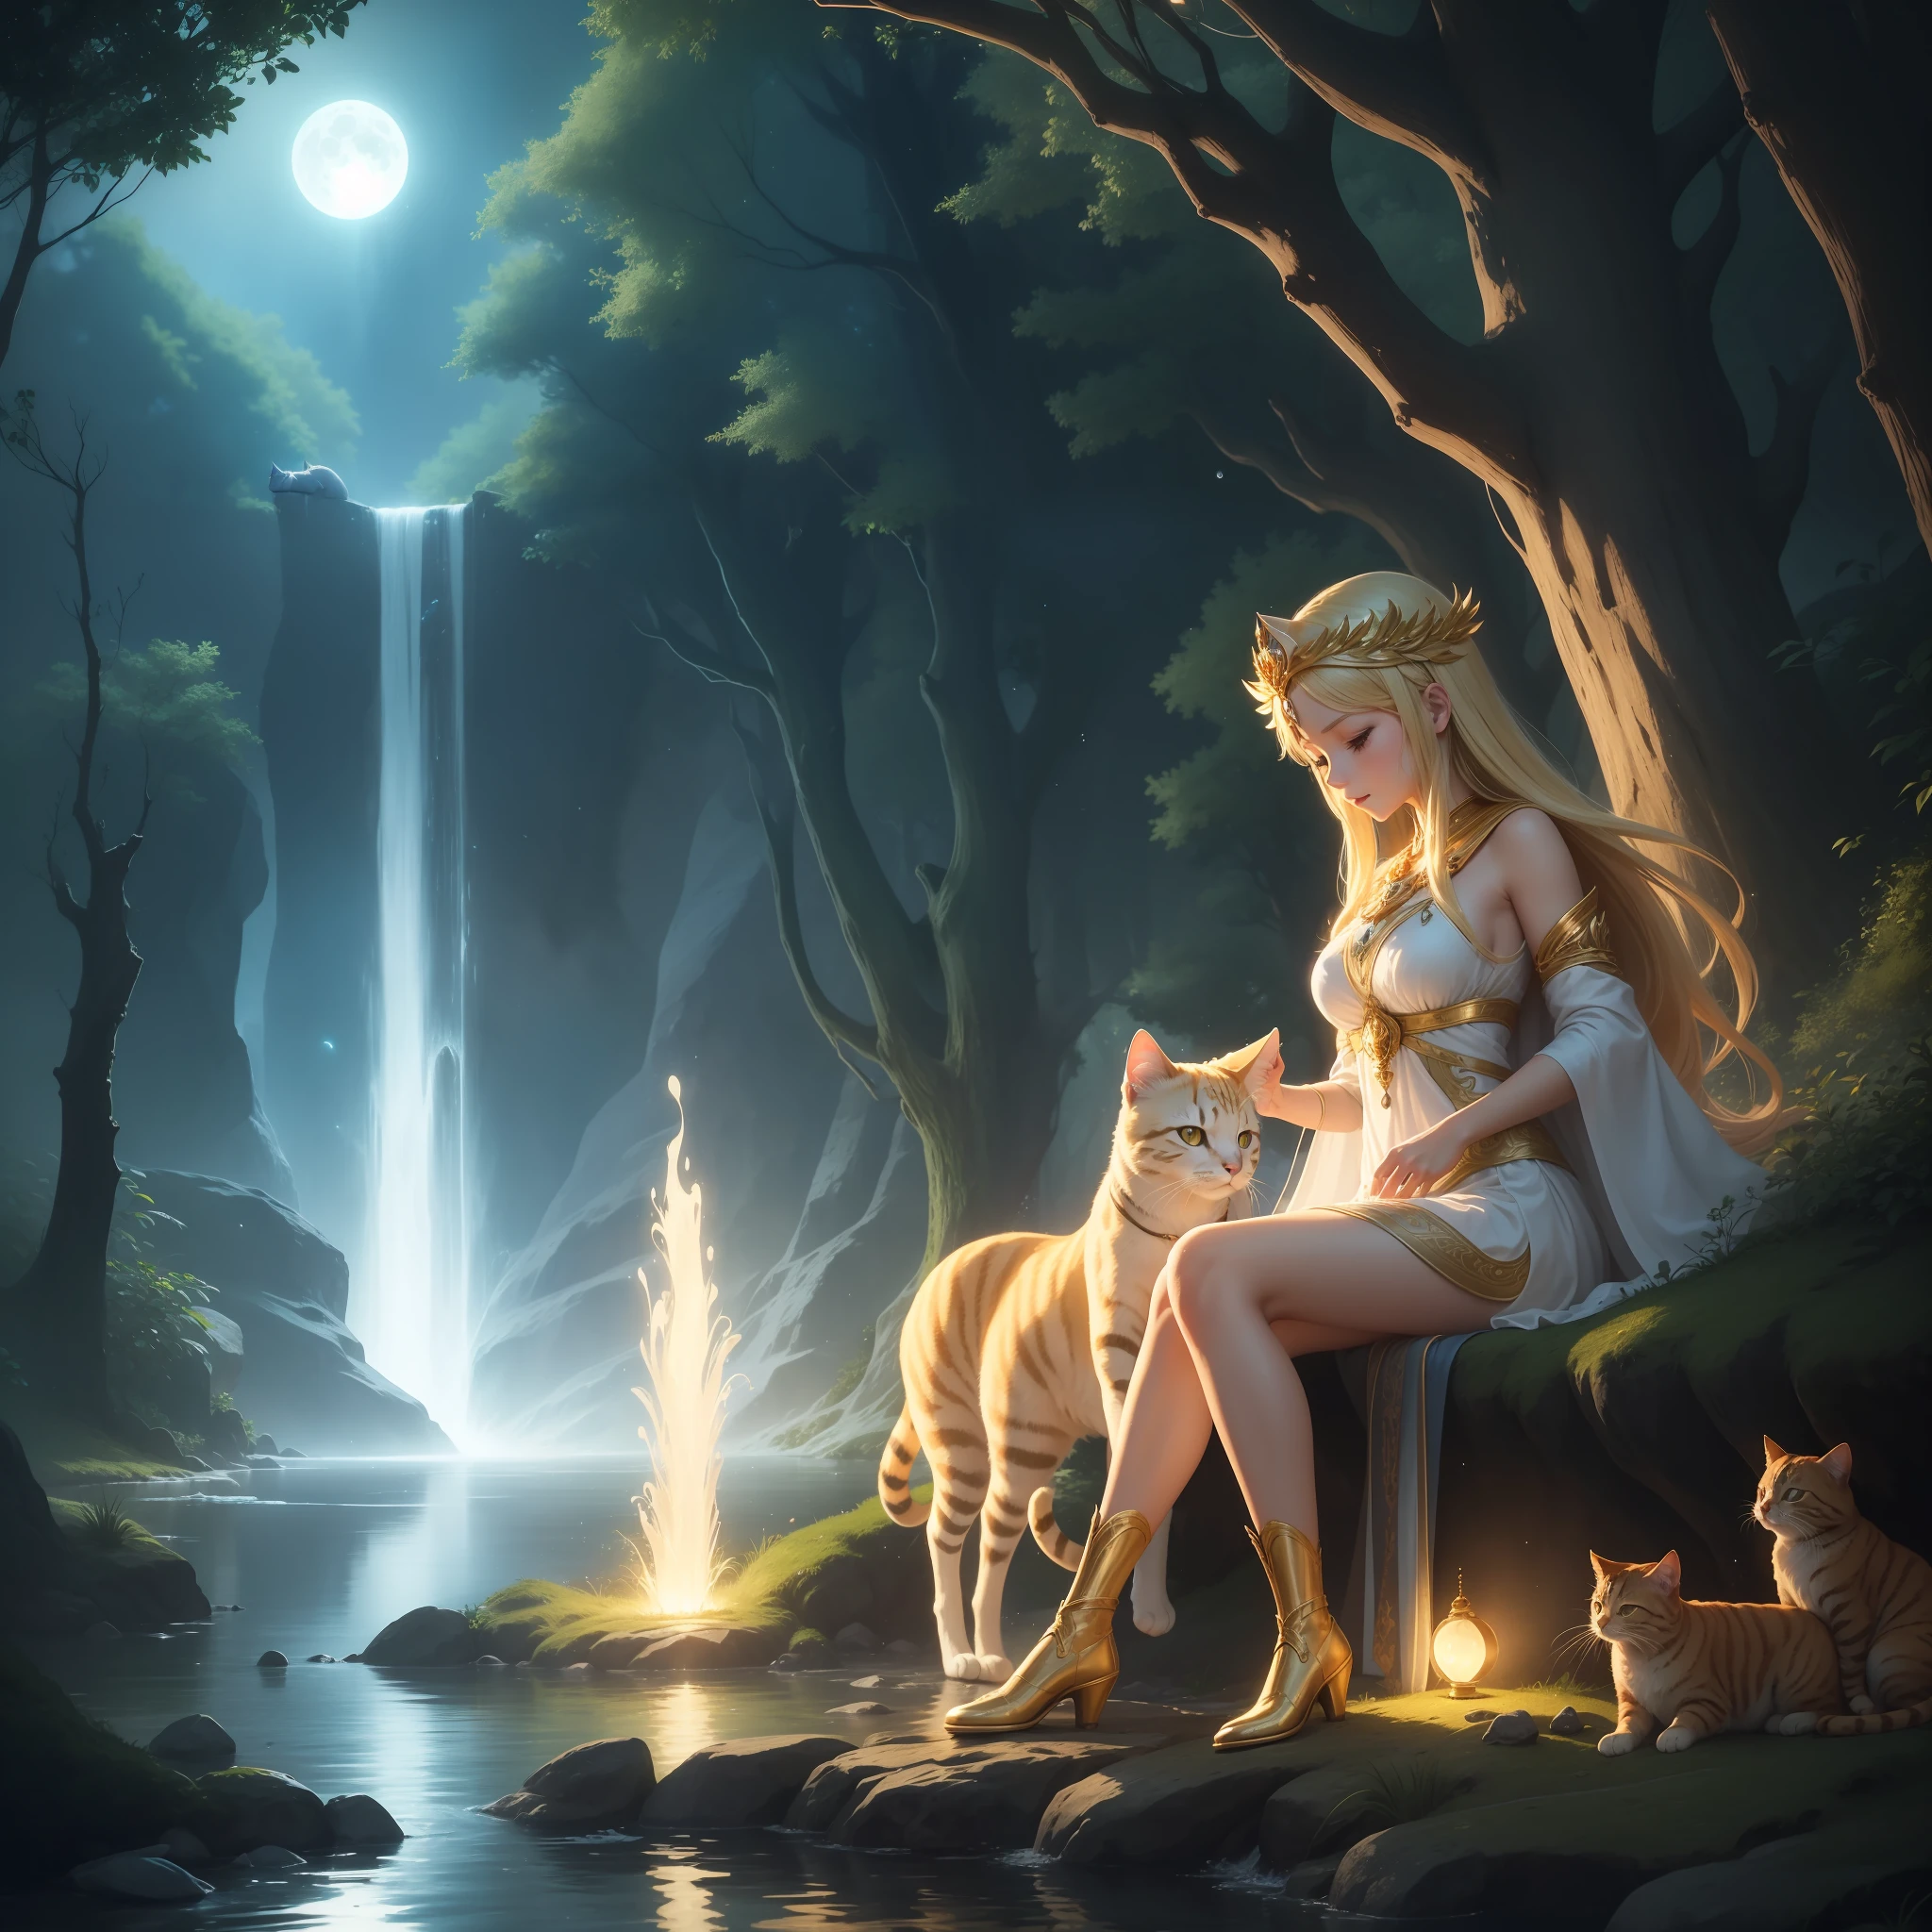 --Goddess Athena --bathing--in a lake --under the soft moonlight --her radiant skin reflecting the bright moon --Golden hair fluttering in the wind --Eyes bright as twinkling stars --Crystal clear water caressing her divine form --The yellow cat with boots --lurking hidden --with curious and mischievous look --Her whiskers moving smoothly --The scenery is enchanting --the mysterious forest shrouded in a magical aura --majestic trees with dense foliage --the moonlight filtered by the green canopies --The soft sound of running water in the lake creates a serene atmosphere --The stars dot the night sky, adicionando um toque de encanto celestial --Enquanto Atena se banha, the scene is enveloped by an ethereal glow - the drops of water seem to flash around it - The yellow cat moves surreptitiously, leaving soft footprints in the sand --A sense of mystery and magic permeates the entire environment, while Athena and the cat enjoy this unique and special moment. --Special Effects --A cinematic lighting enhances every detail of the scenery --Rays of light from the moon highlight the shapes of the trees and the goddess --The drops of water glow softly, creating a sparkling effect --Panoramic camera reveals the lush beauty of the forest and lake --Detailed close-ups enhance Athena's serene expression and the cat's curiosity --Soft, Ethereal music creates a magical and engaging atmosphere --Careful editing gives rhythm to the scene, underscoring the charm of the moment --The scene is full of mystery and surprise, with clever cuts that emphasize the interaction between the goddess and the cat --The special effects give a magical and celestial touch to the whole scene, transportando o espectador para um universo encantado de mitos e maravilhas.